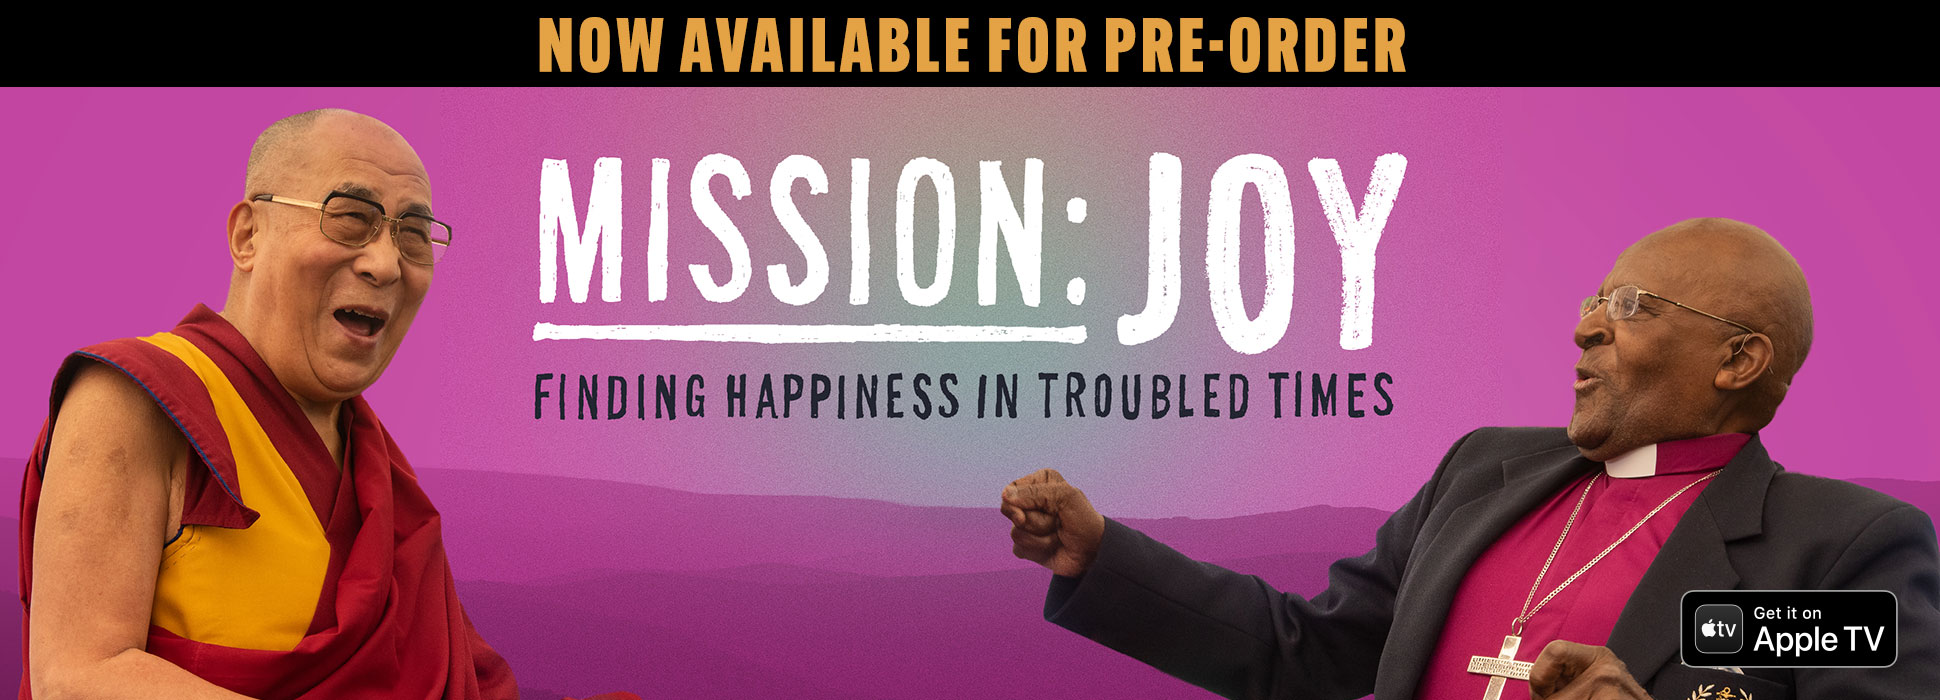 Mission: JOY is now available for Pre-Order on AppleTV in the USA and Canada